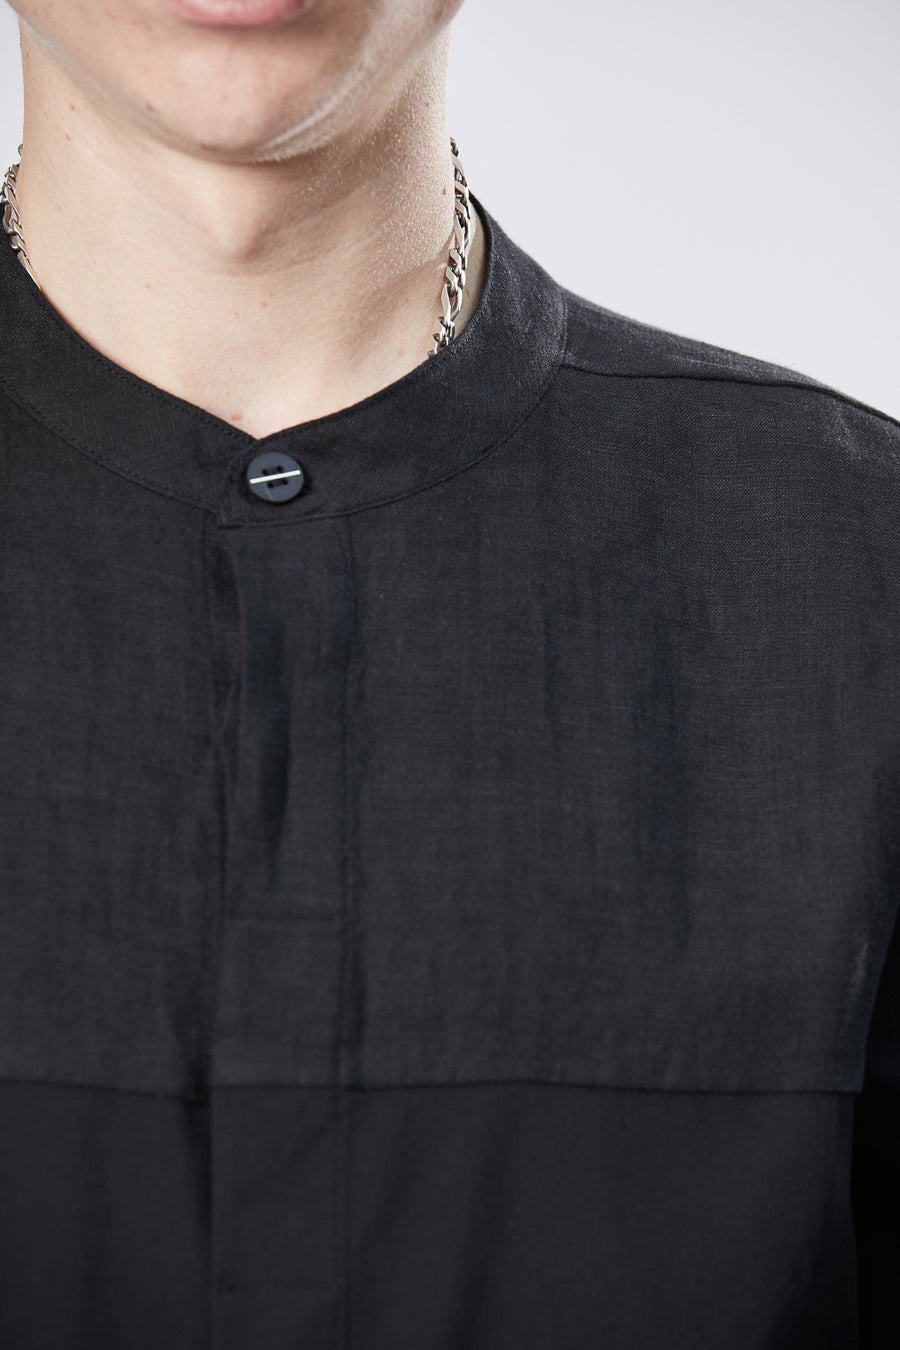 Buy the Thom Krom M H 147 Shirt in Black at Intro. Spend £50 for free UK delivery. Official stockists. We ship worldwide.